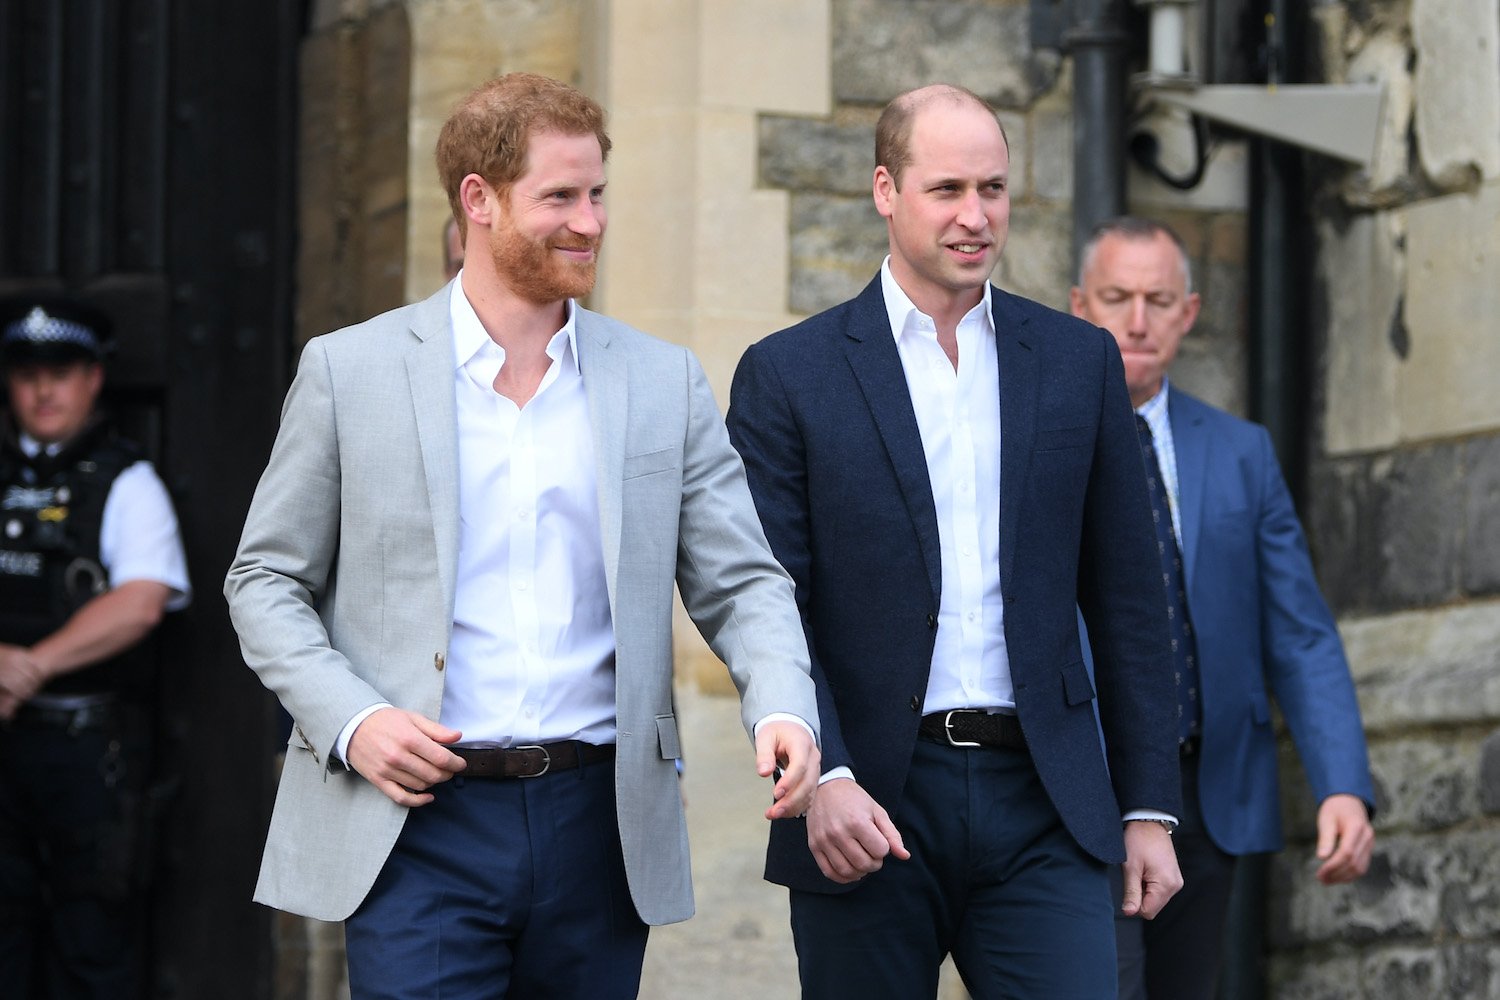 Prince Harry and Prince William take a walkabout before 2018 royal wedding